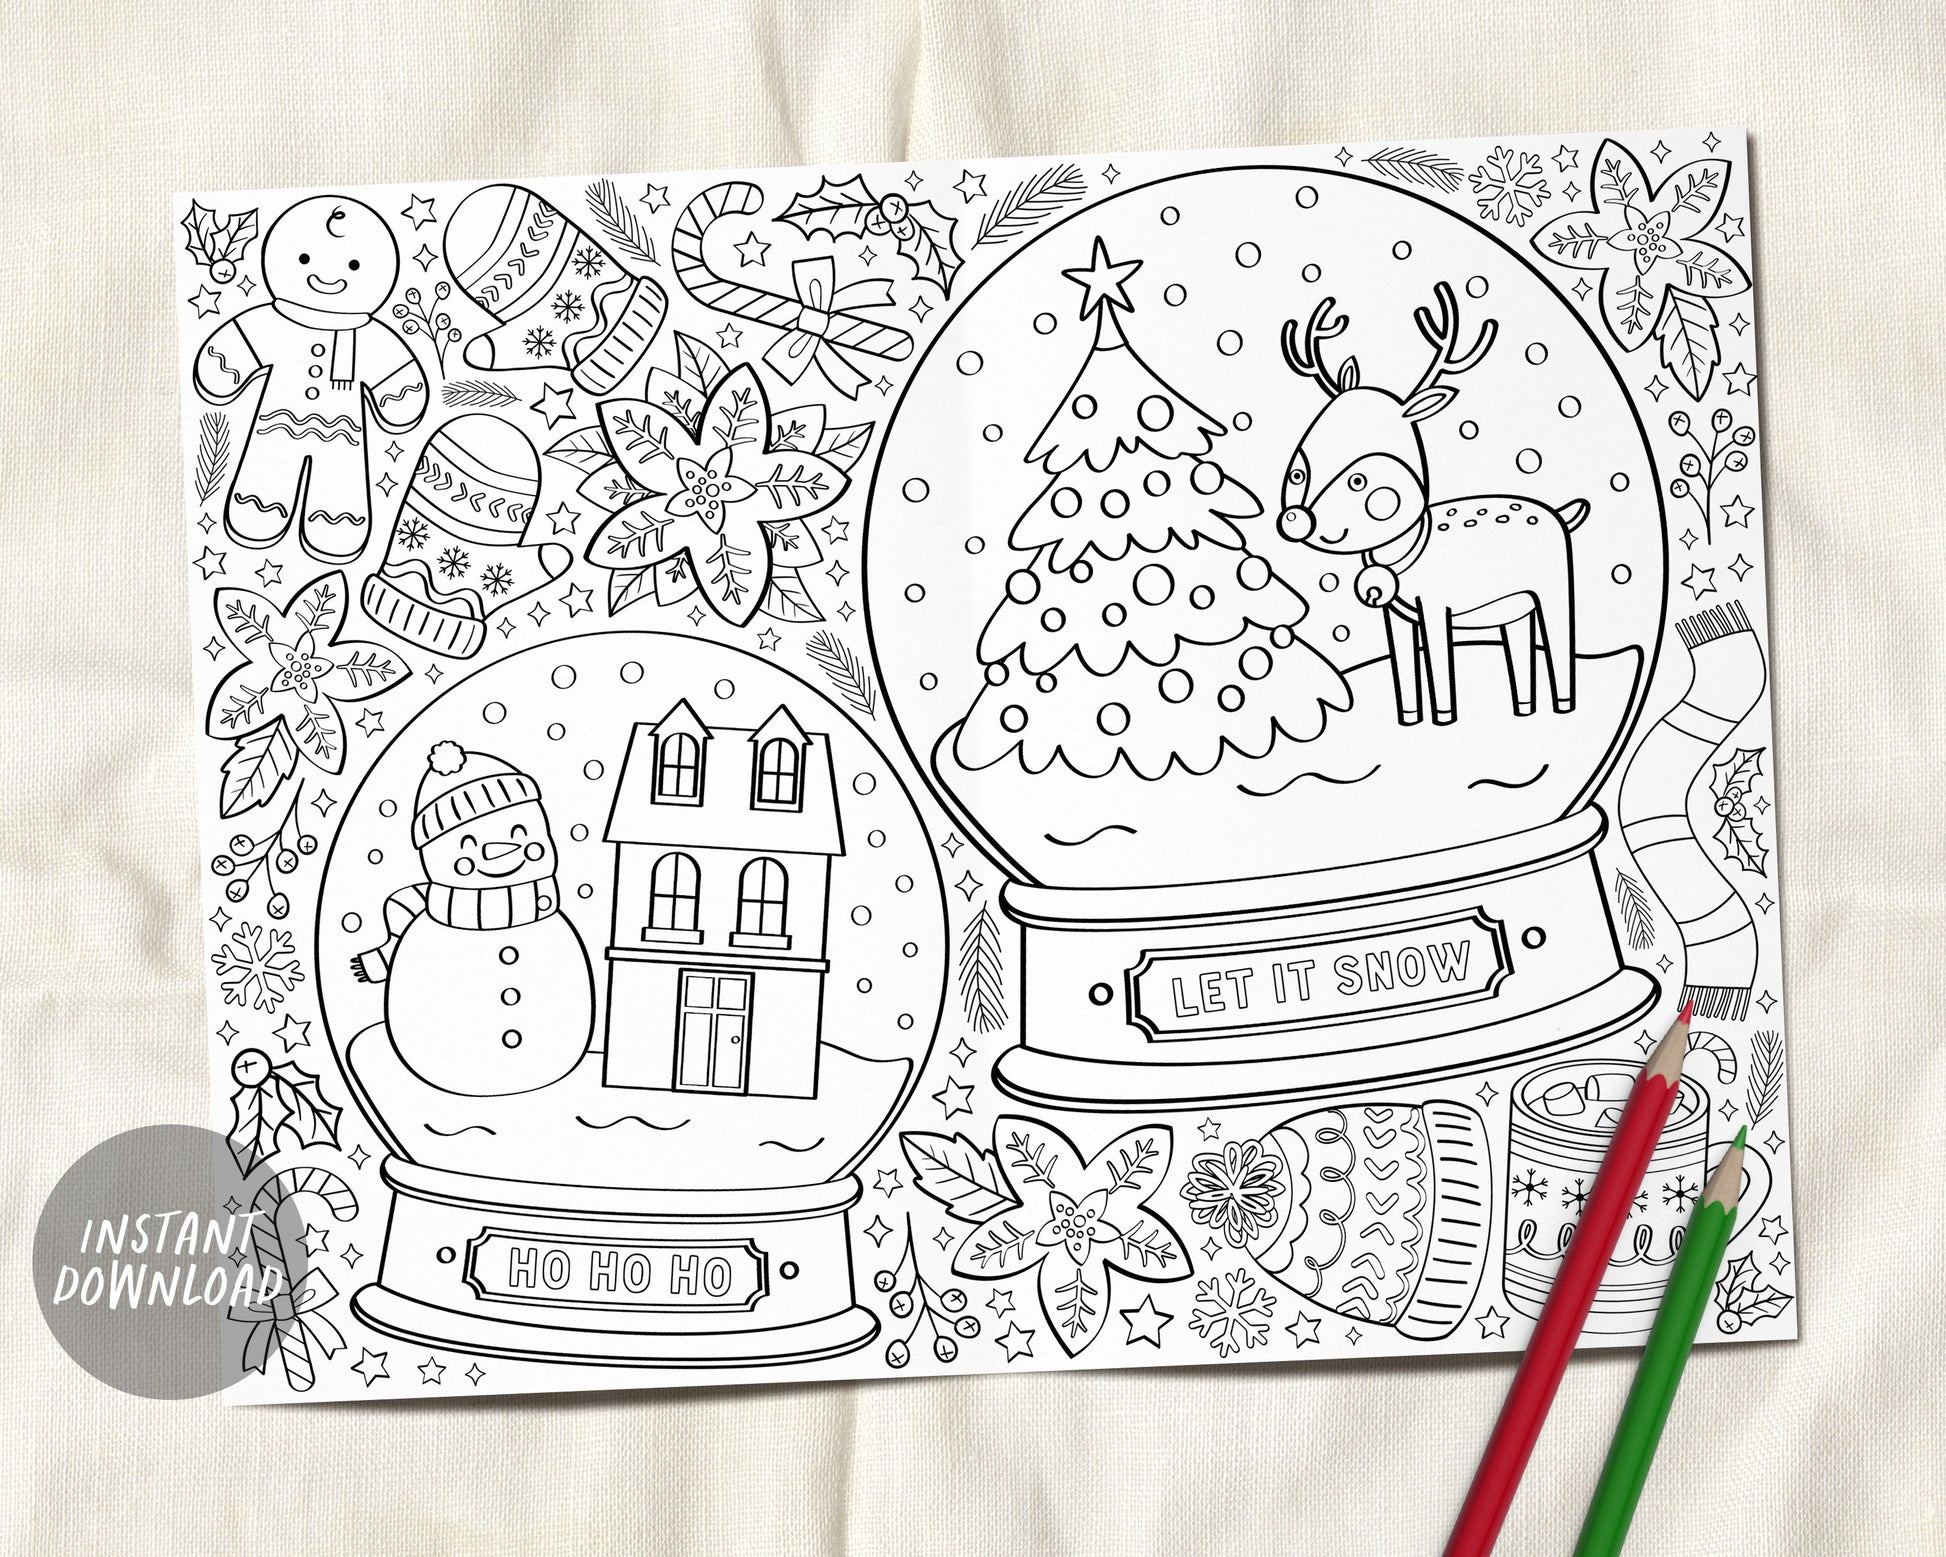 Winter wonderland coloring page placemat for kids snow globe holiday â puff paper co